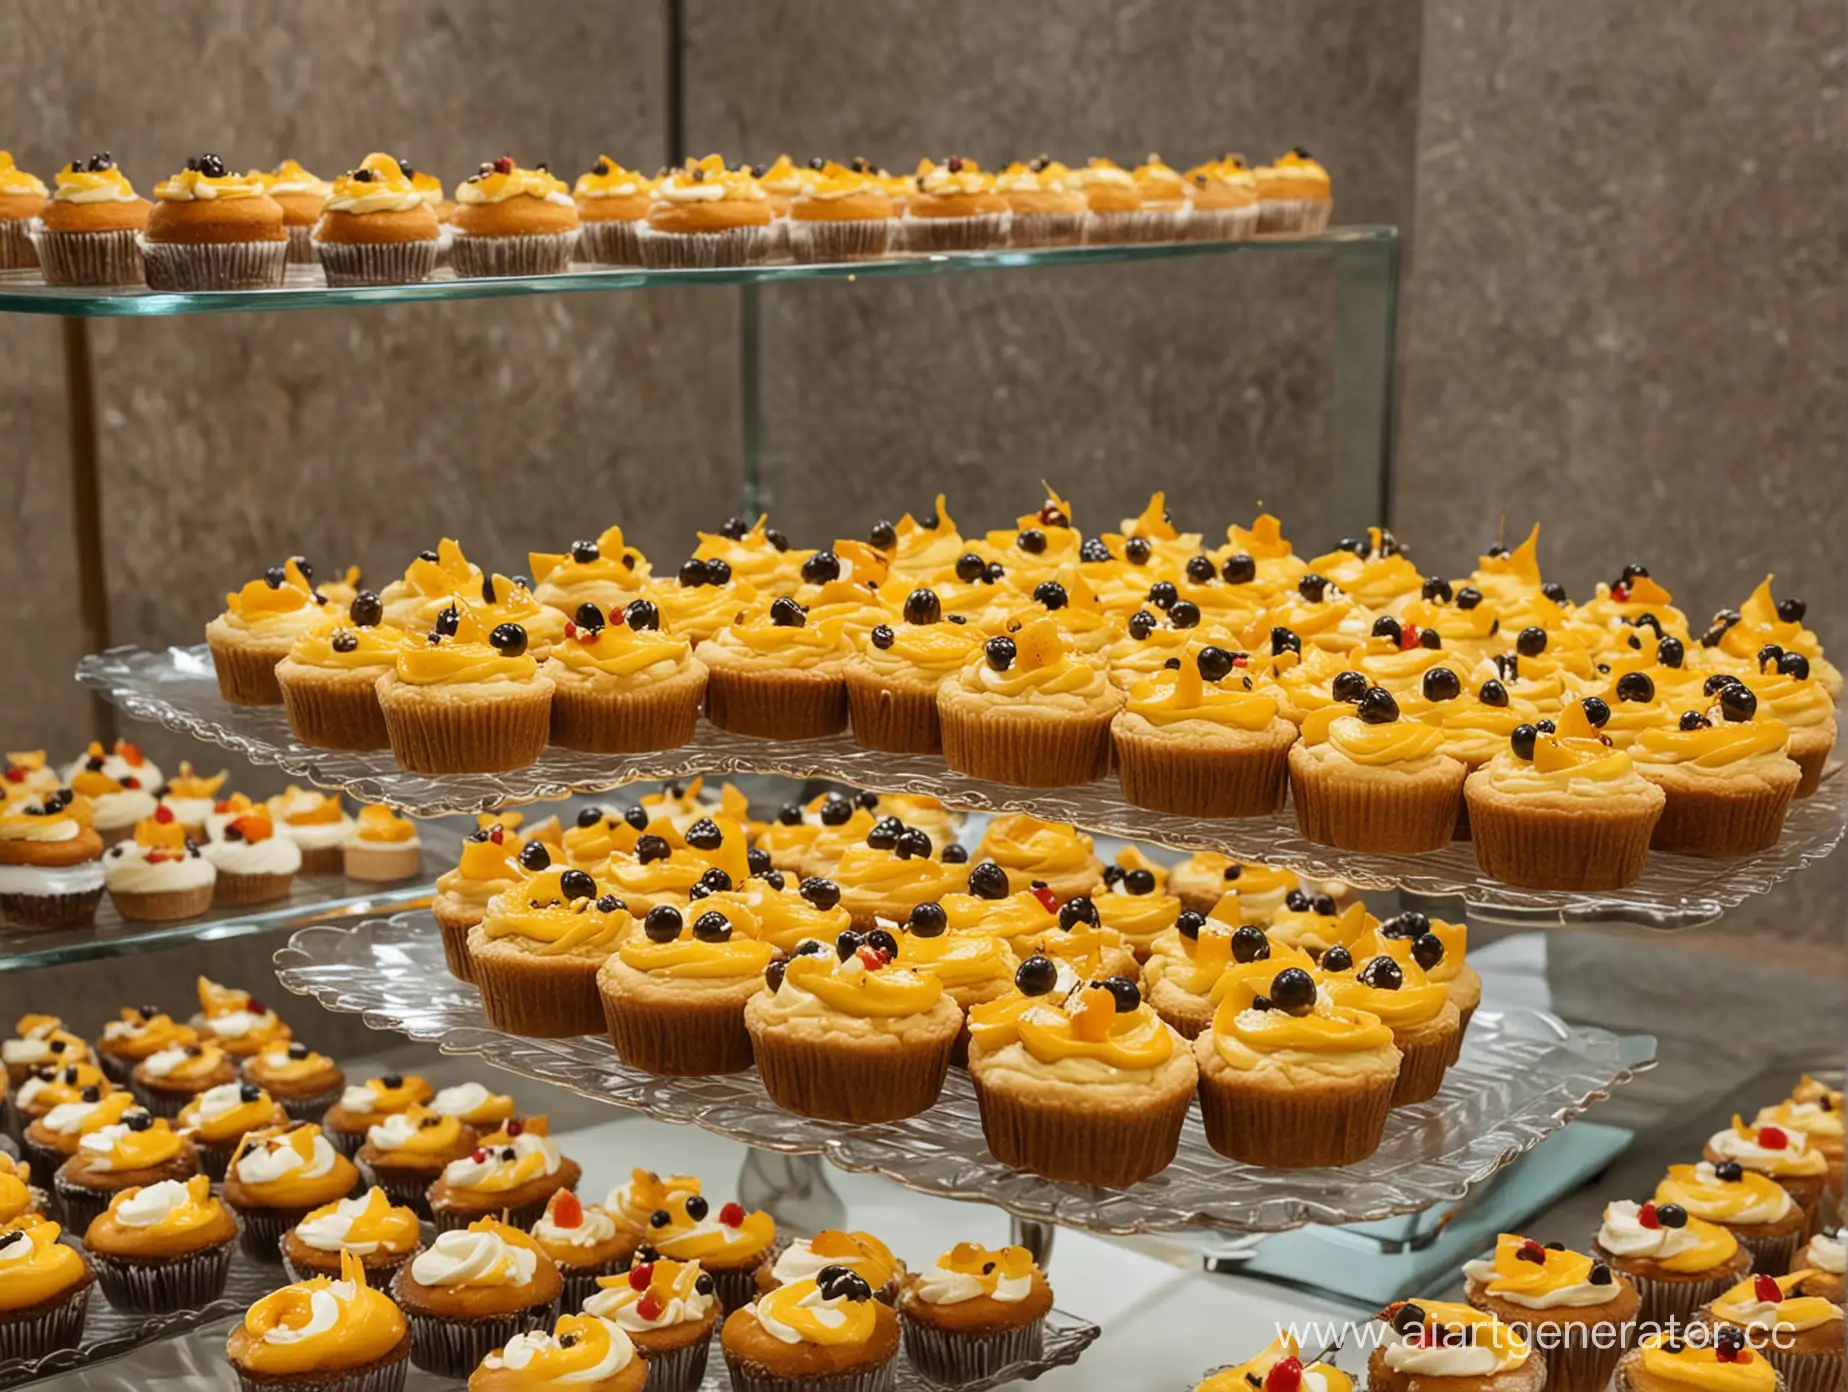 Delightful-Dessert-Showcase-Assorted-Cakes-and-Cupcakes-with-Vibrant-Toppings